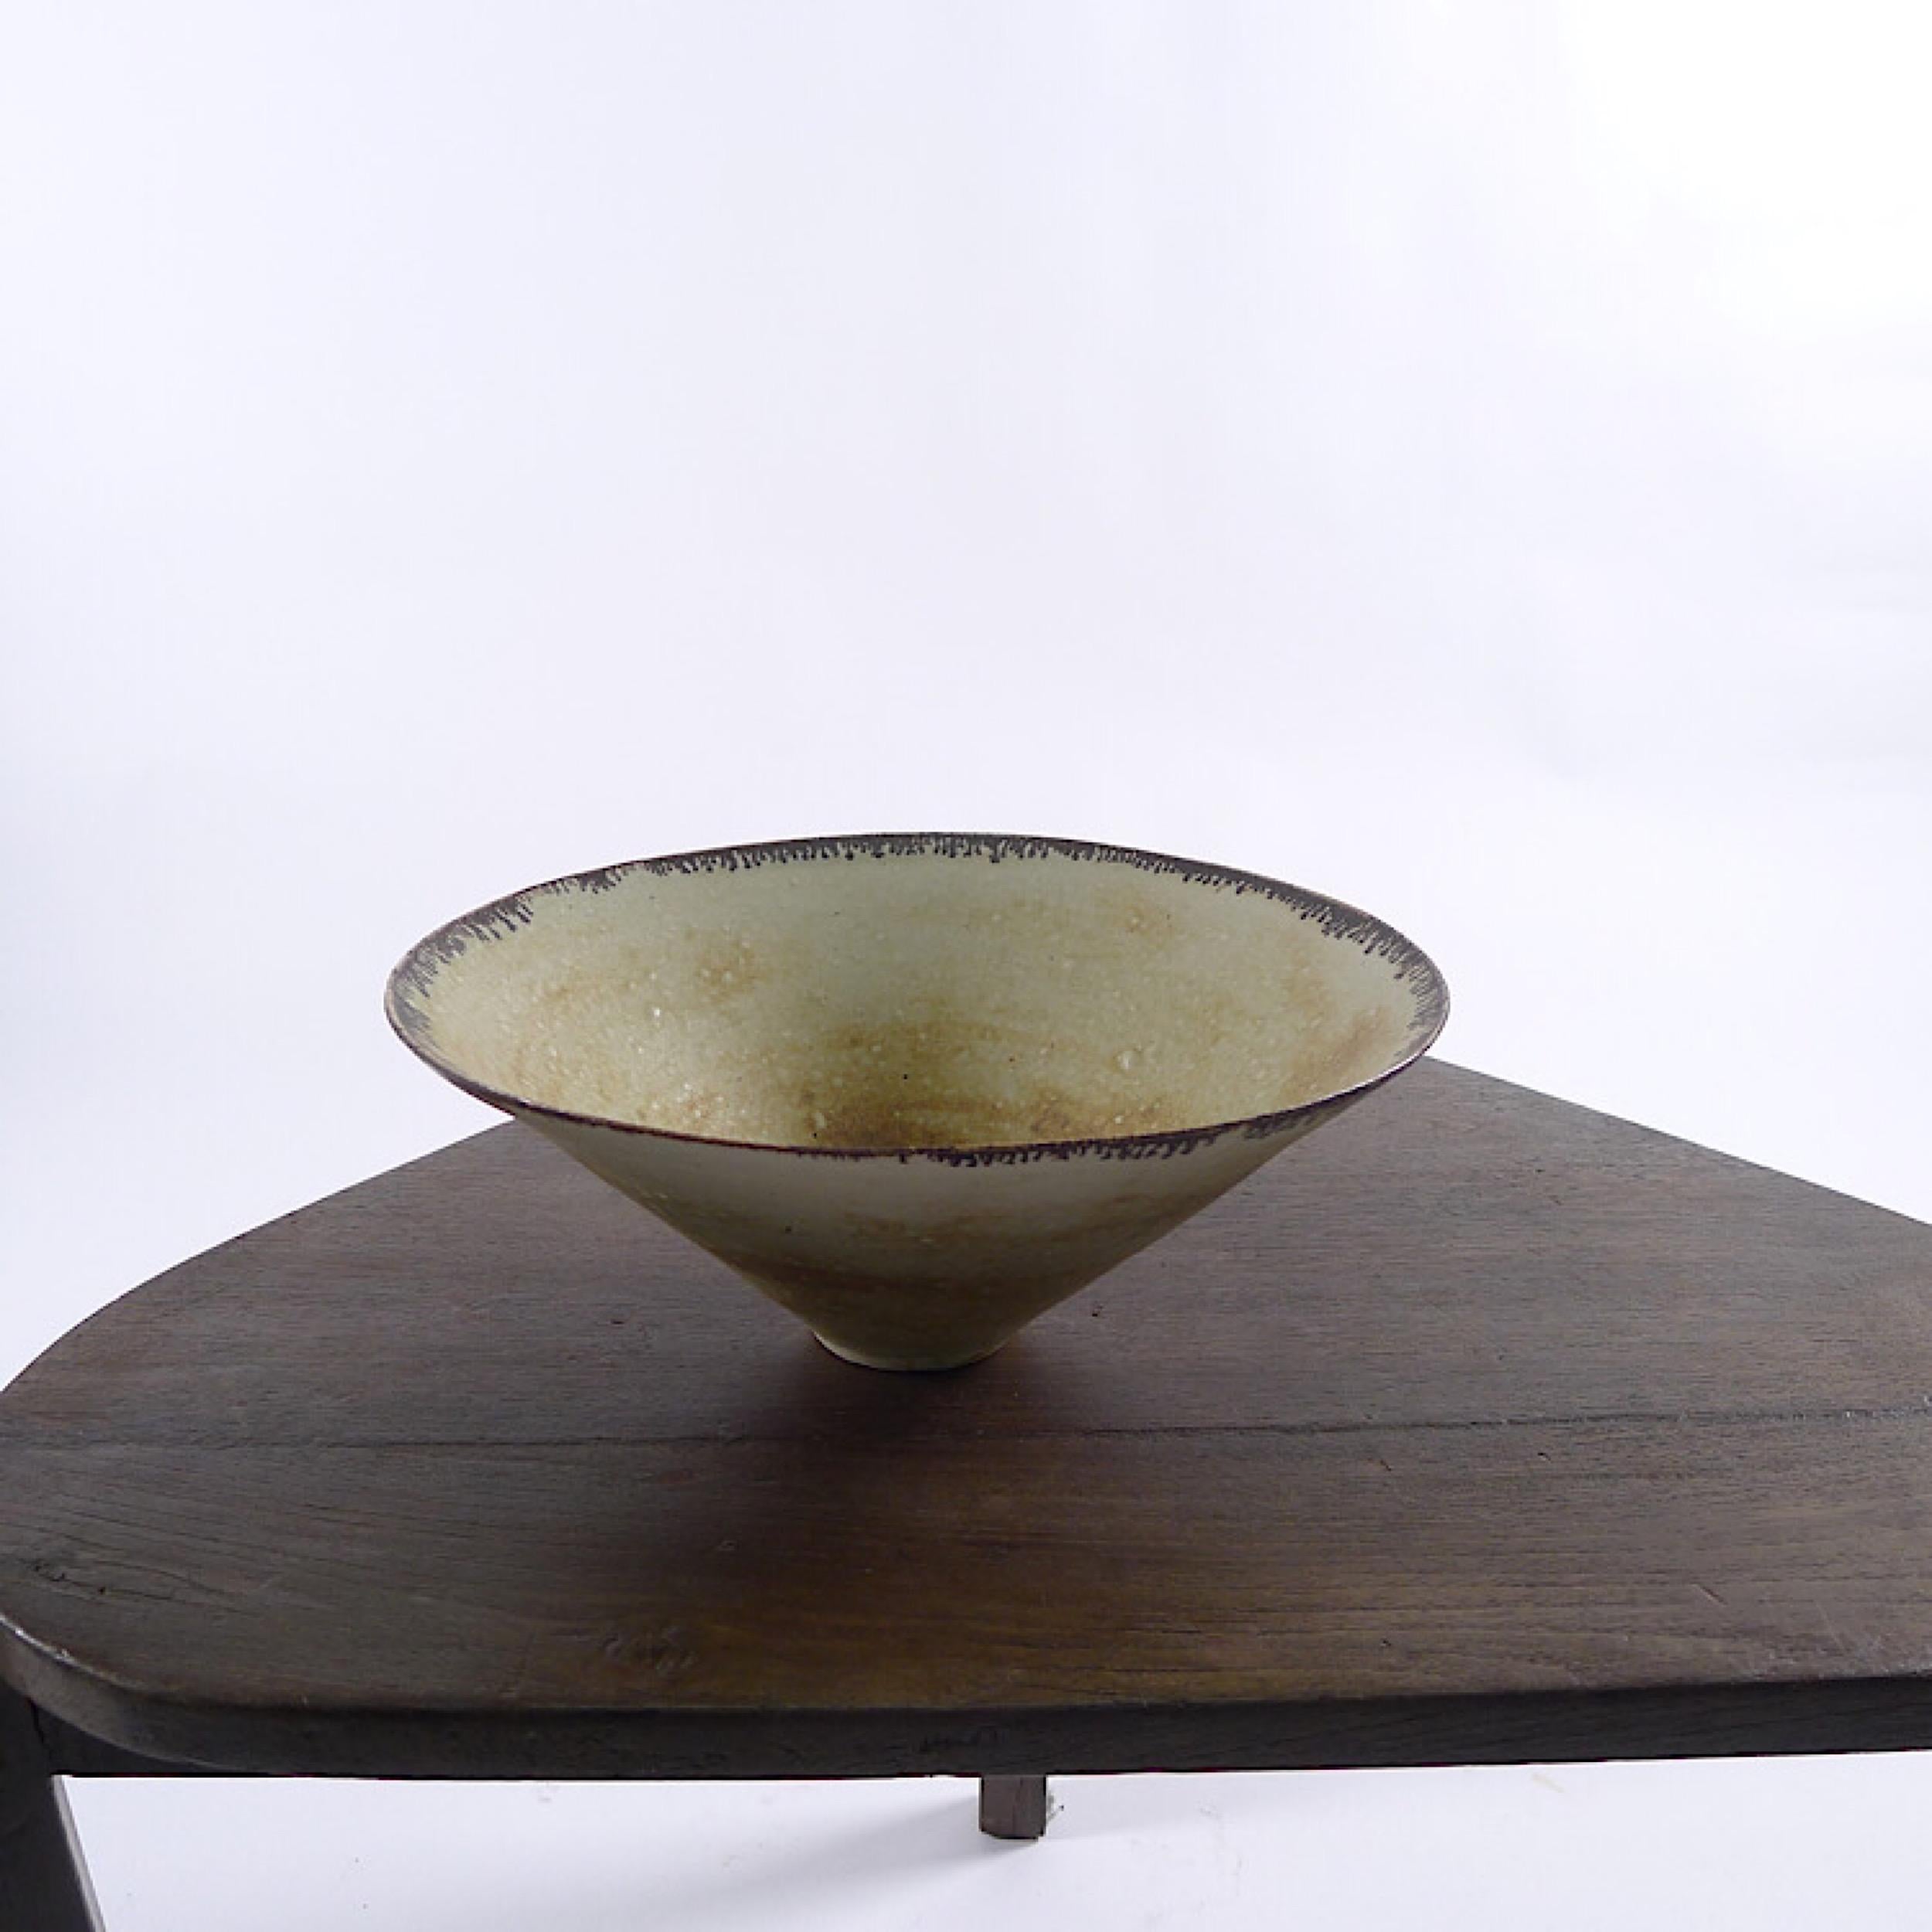 Lucie Rie, Porcelain Bowl, Flaring Conical Form, Impressed Seal Mark 1